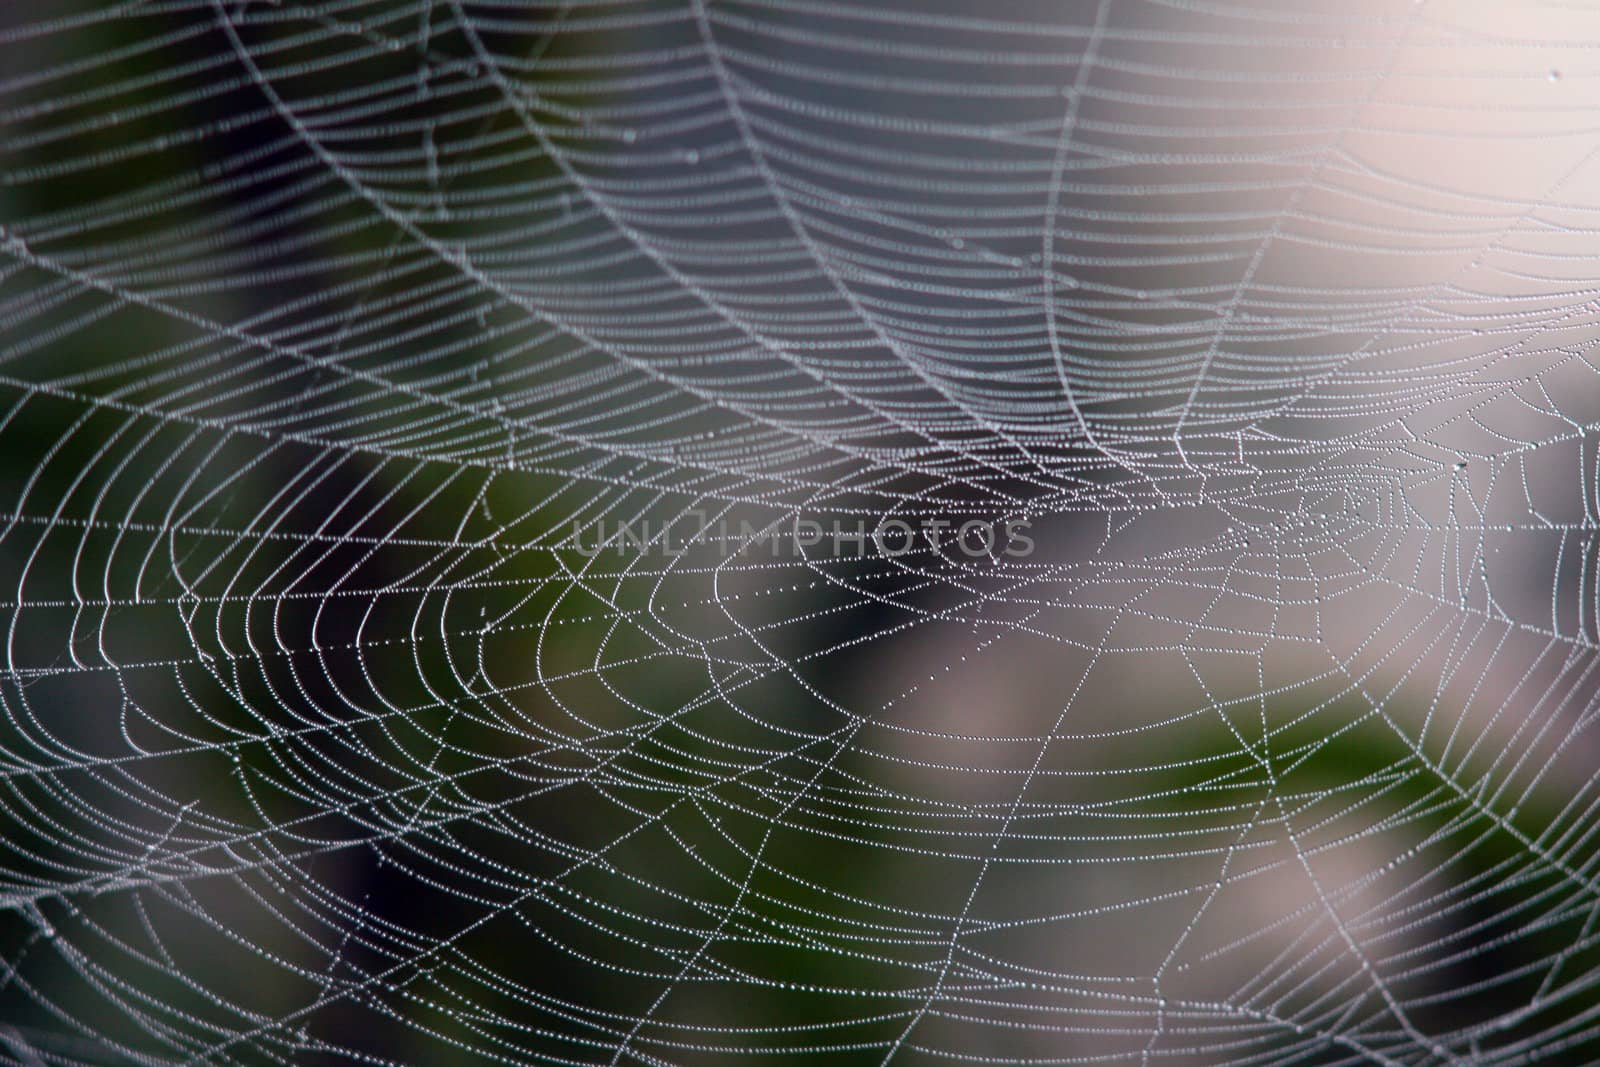 Closeup of spider web with dew drops